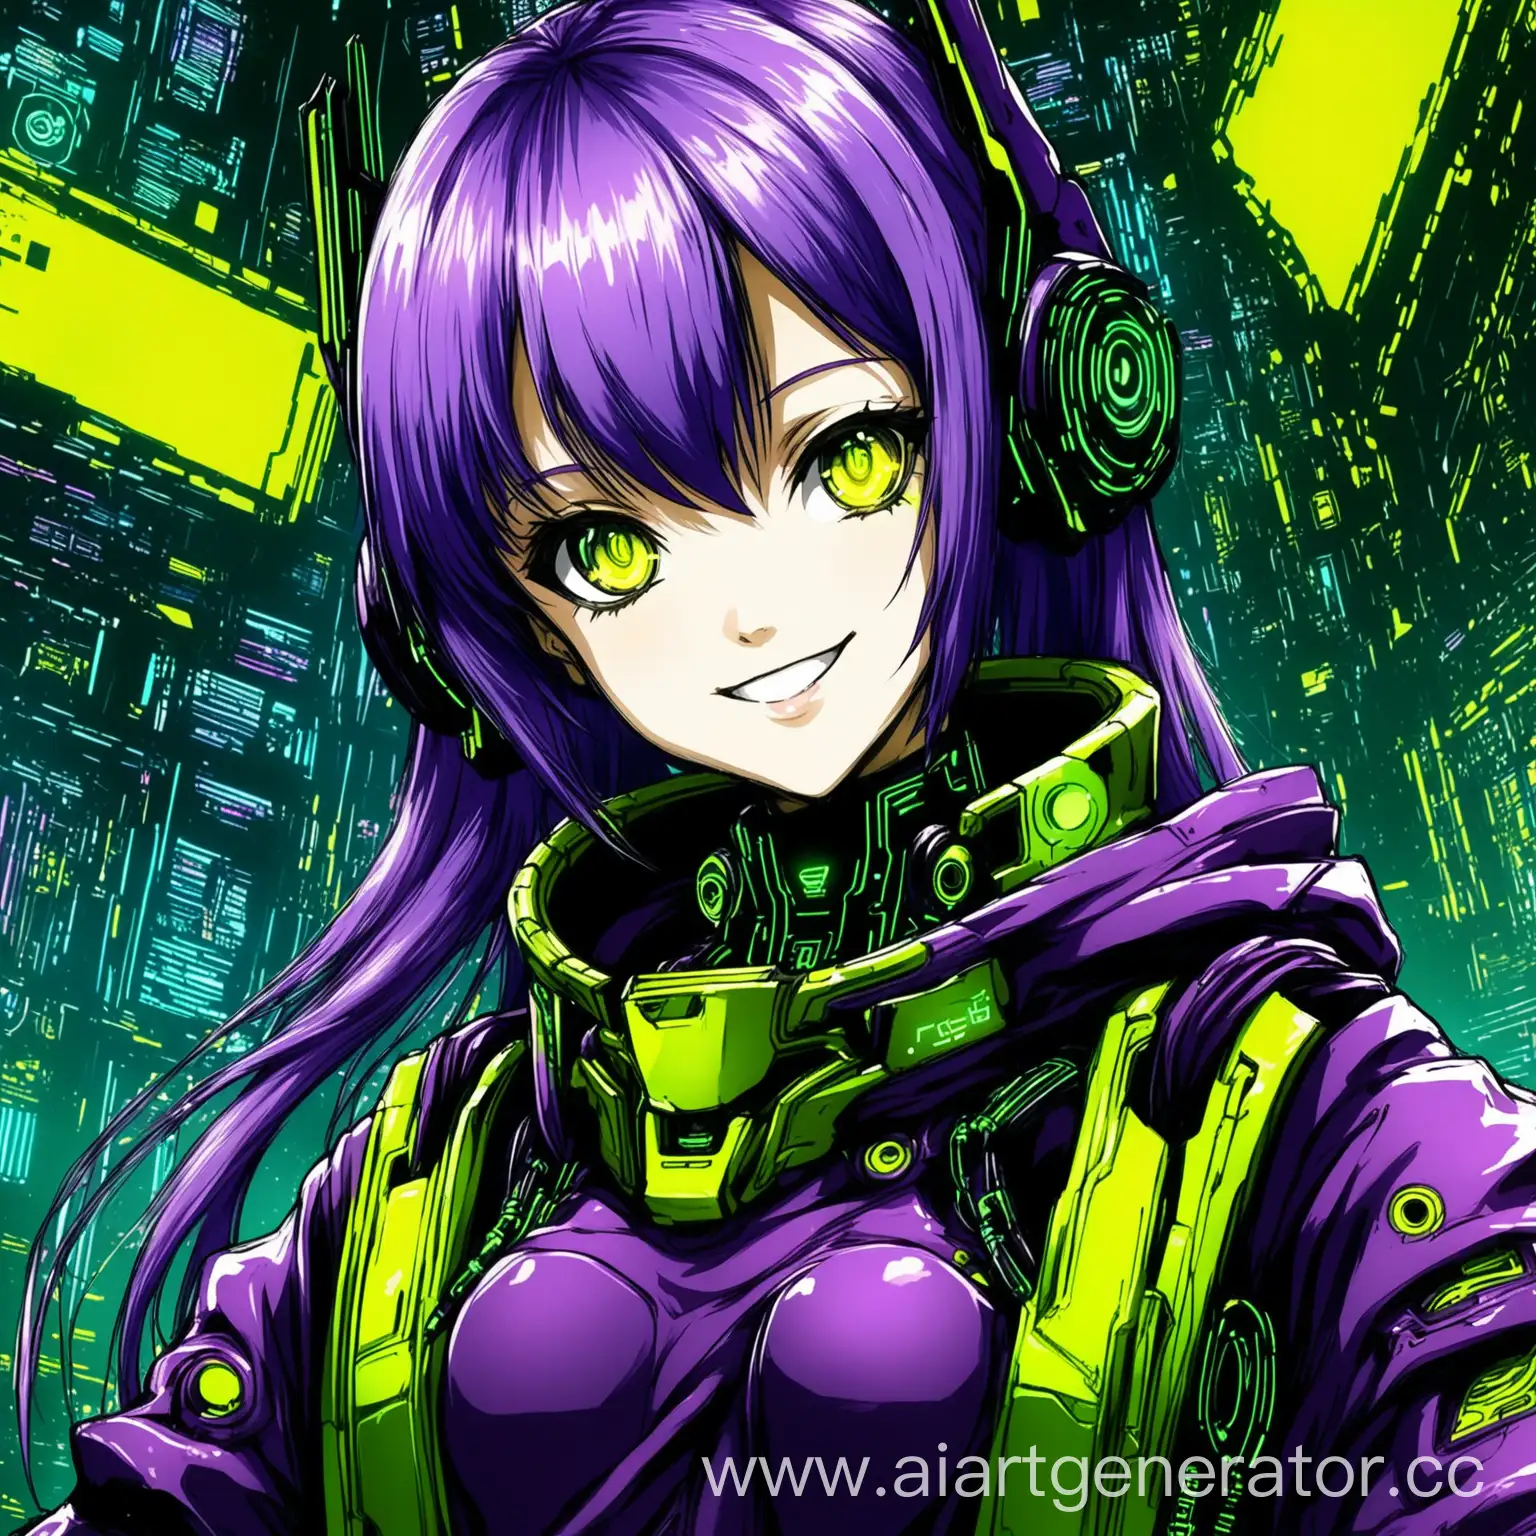 Smiling-Cyberpunk-Anime-Girl-in-Vibrant-Green-Purple-and-Yellow-Colors